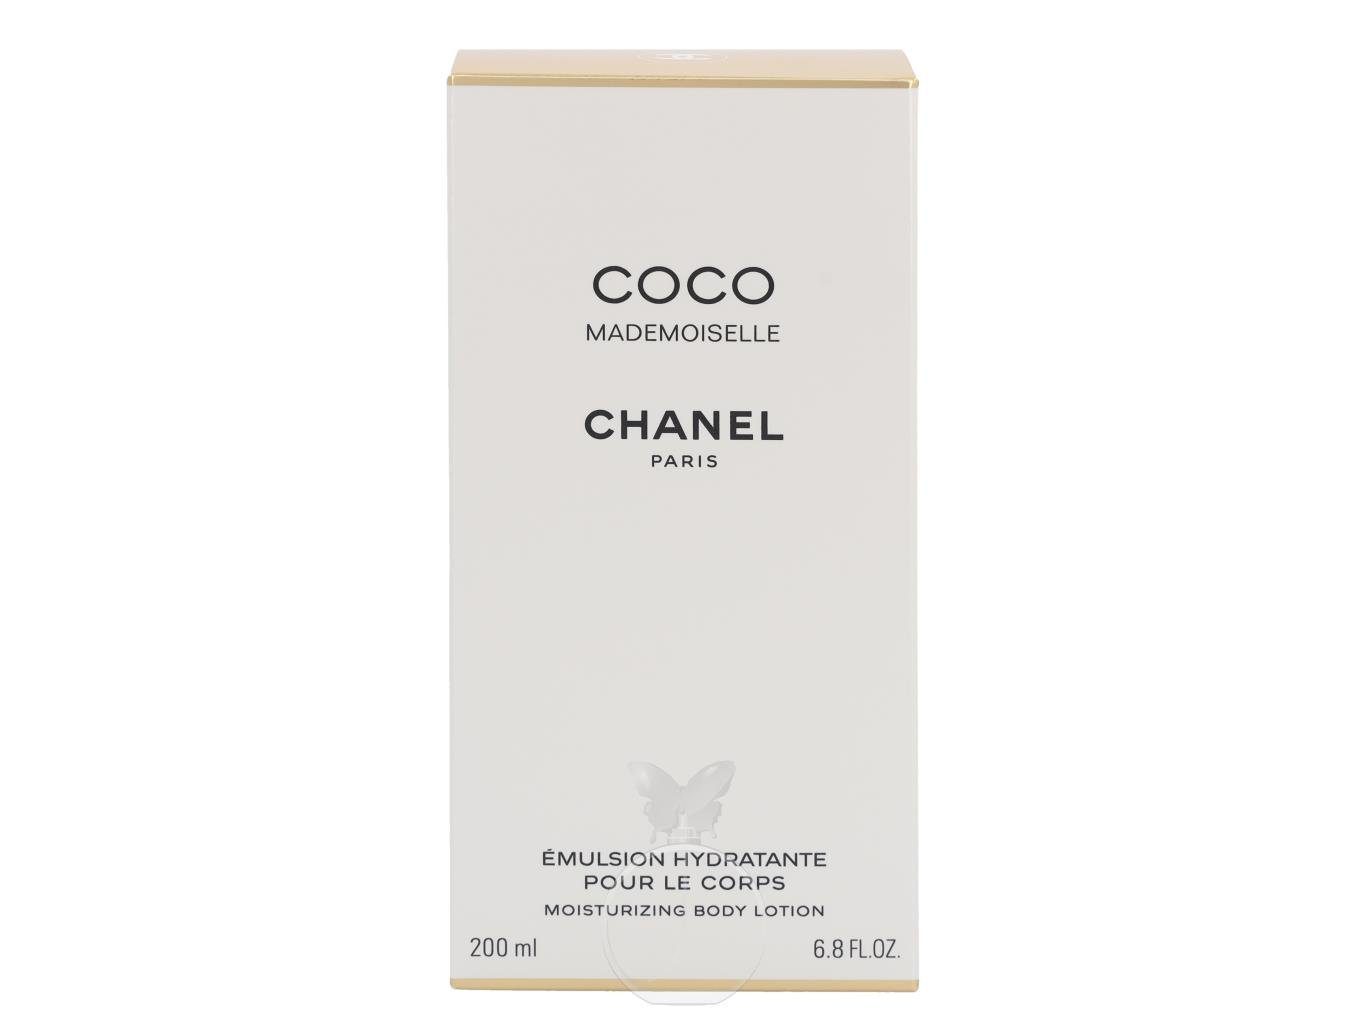 CHANEL Bodylotion Chanel Coco Mademoiselle Body Lotion 200 ml Packung